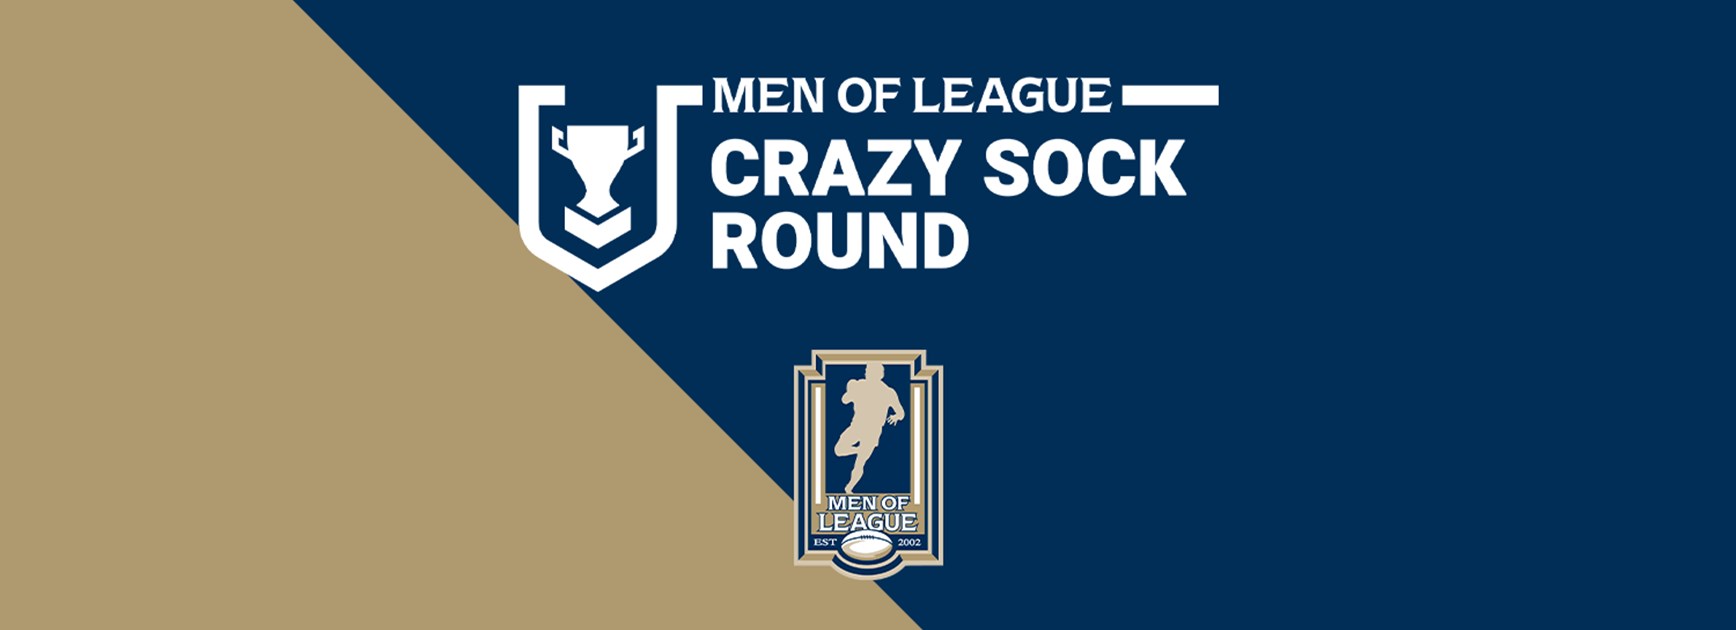 Hostplus Cup Round 15 Men of League Crazy Sock Round team lists